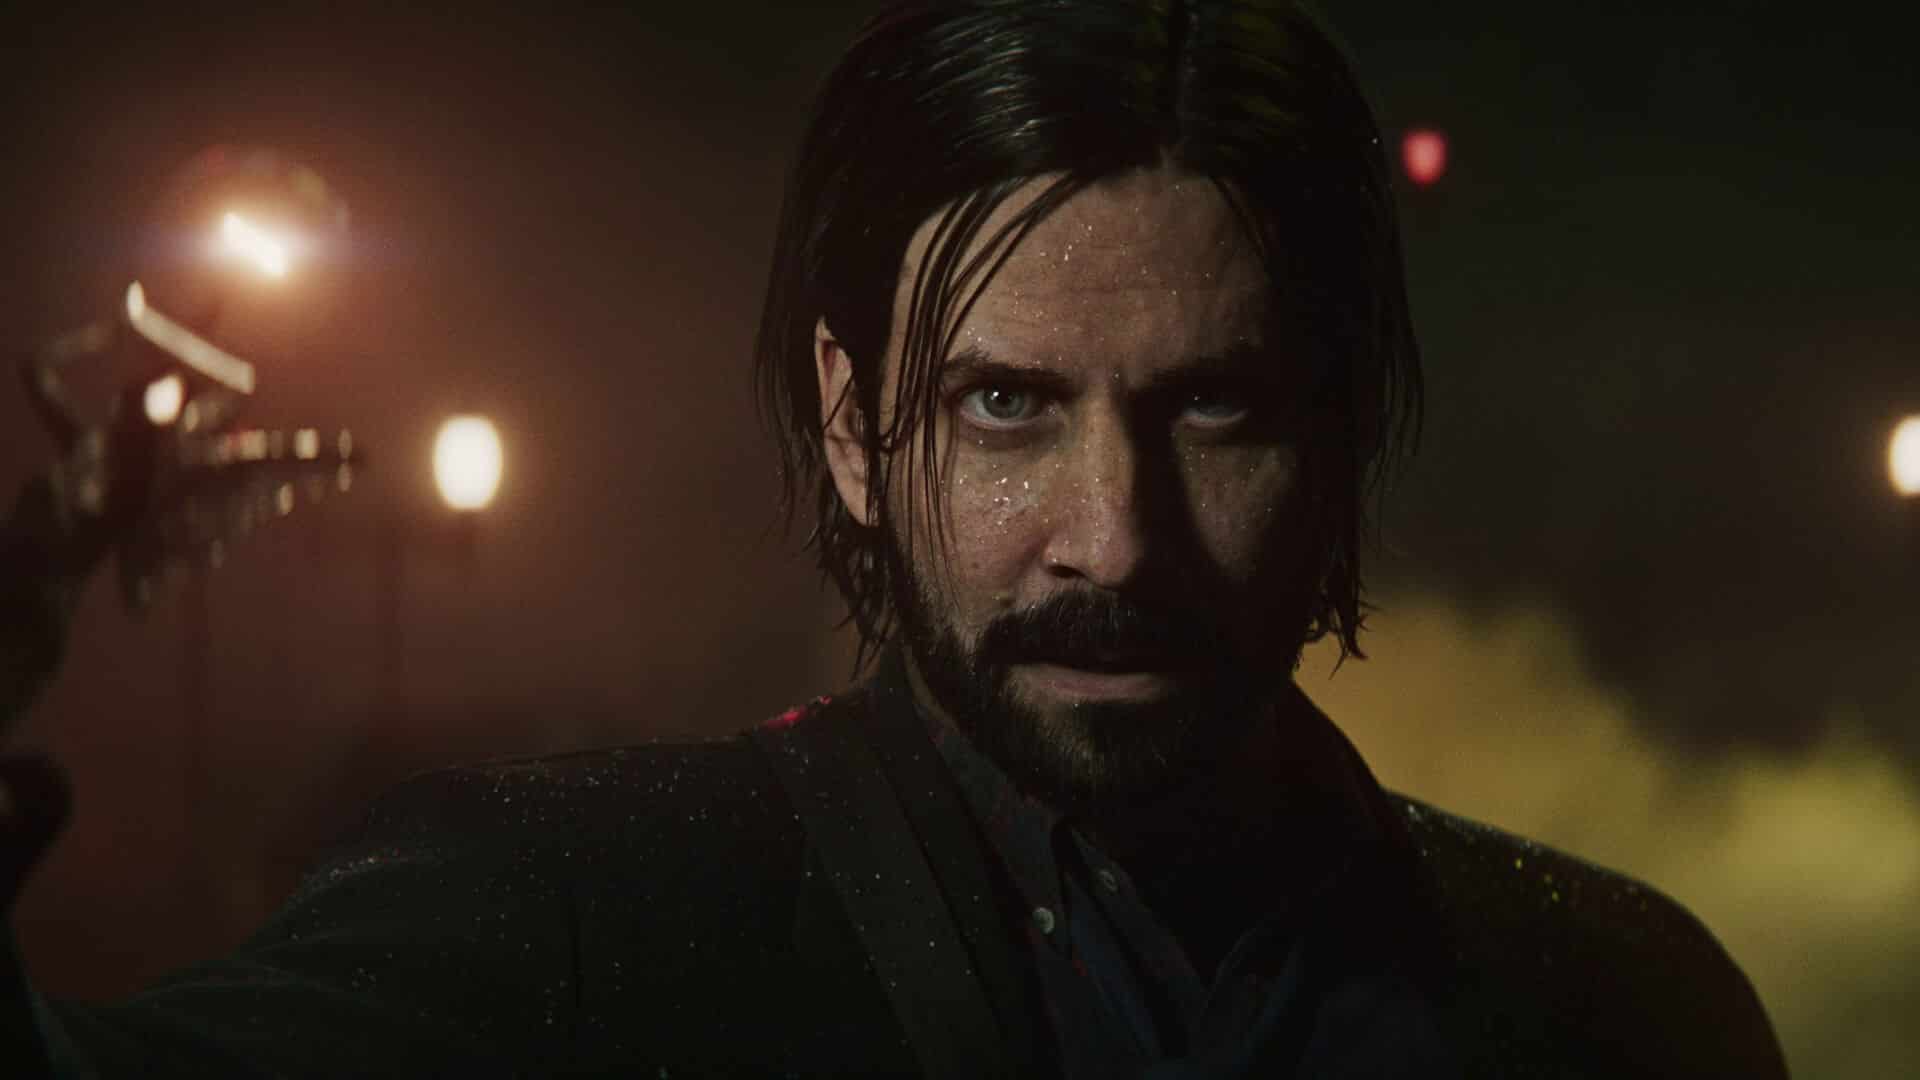 Alan Wake 2 is in full production, completely playable